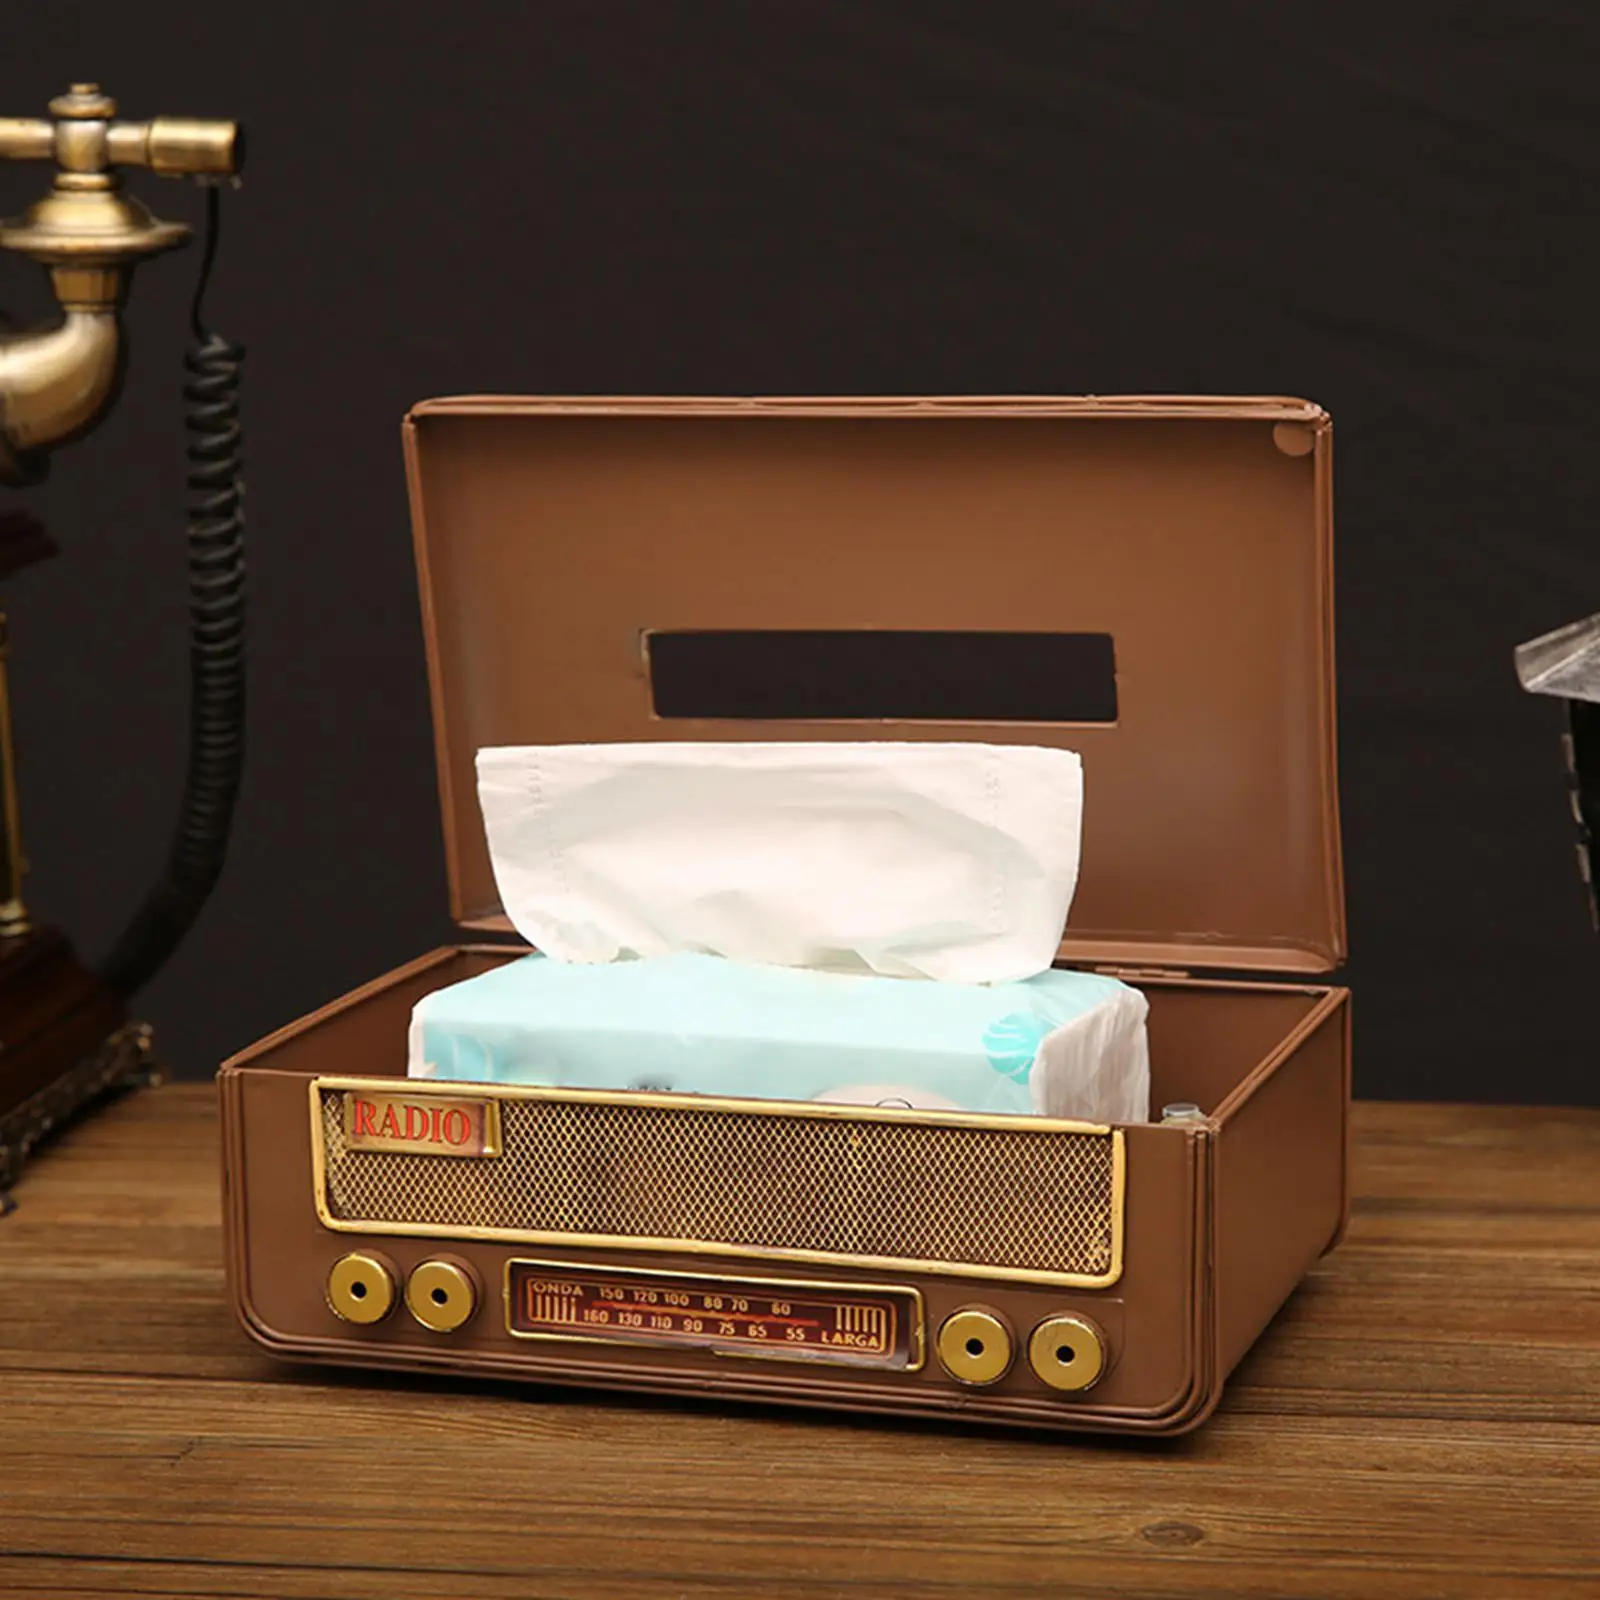 Radio Shape Tissue Box Removable Tissue Case for Living Room Craft Room Home Office